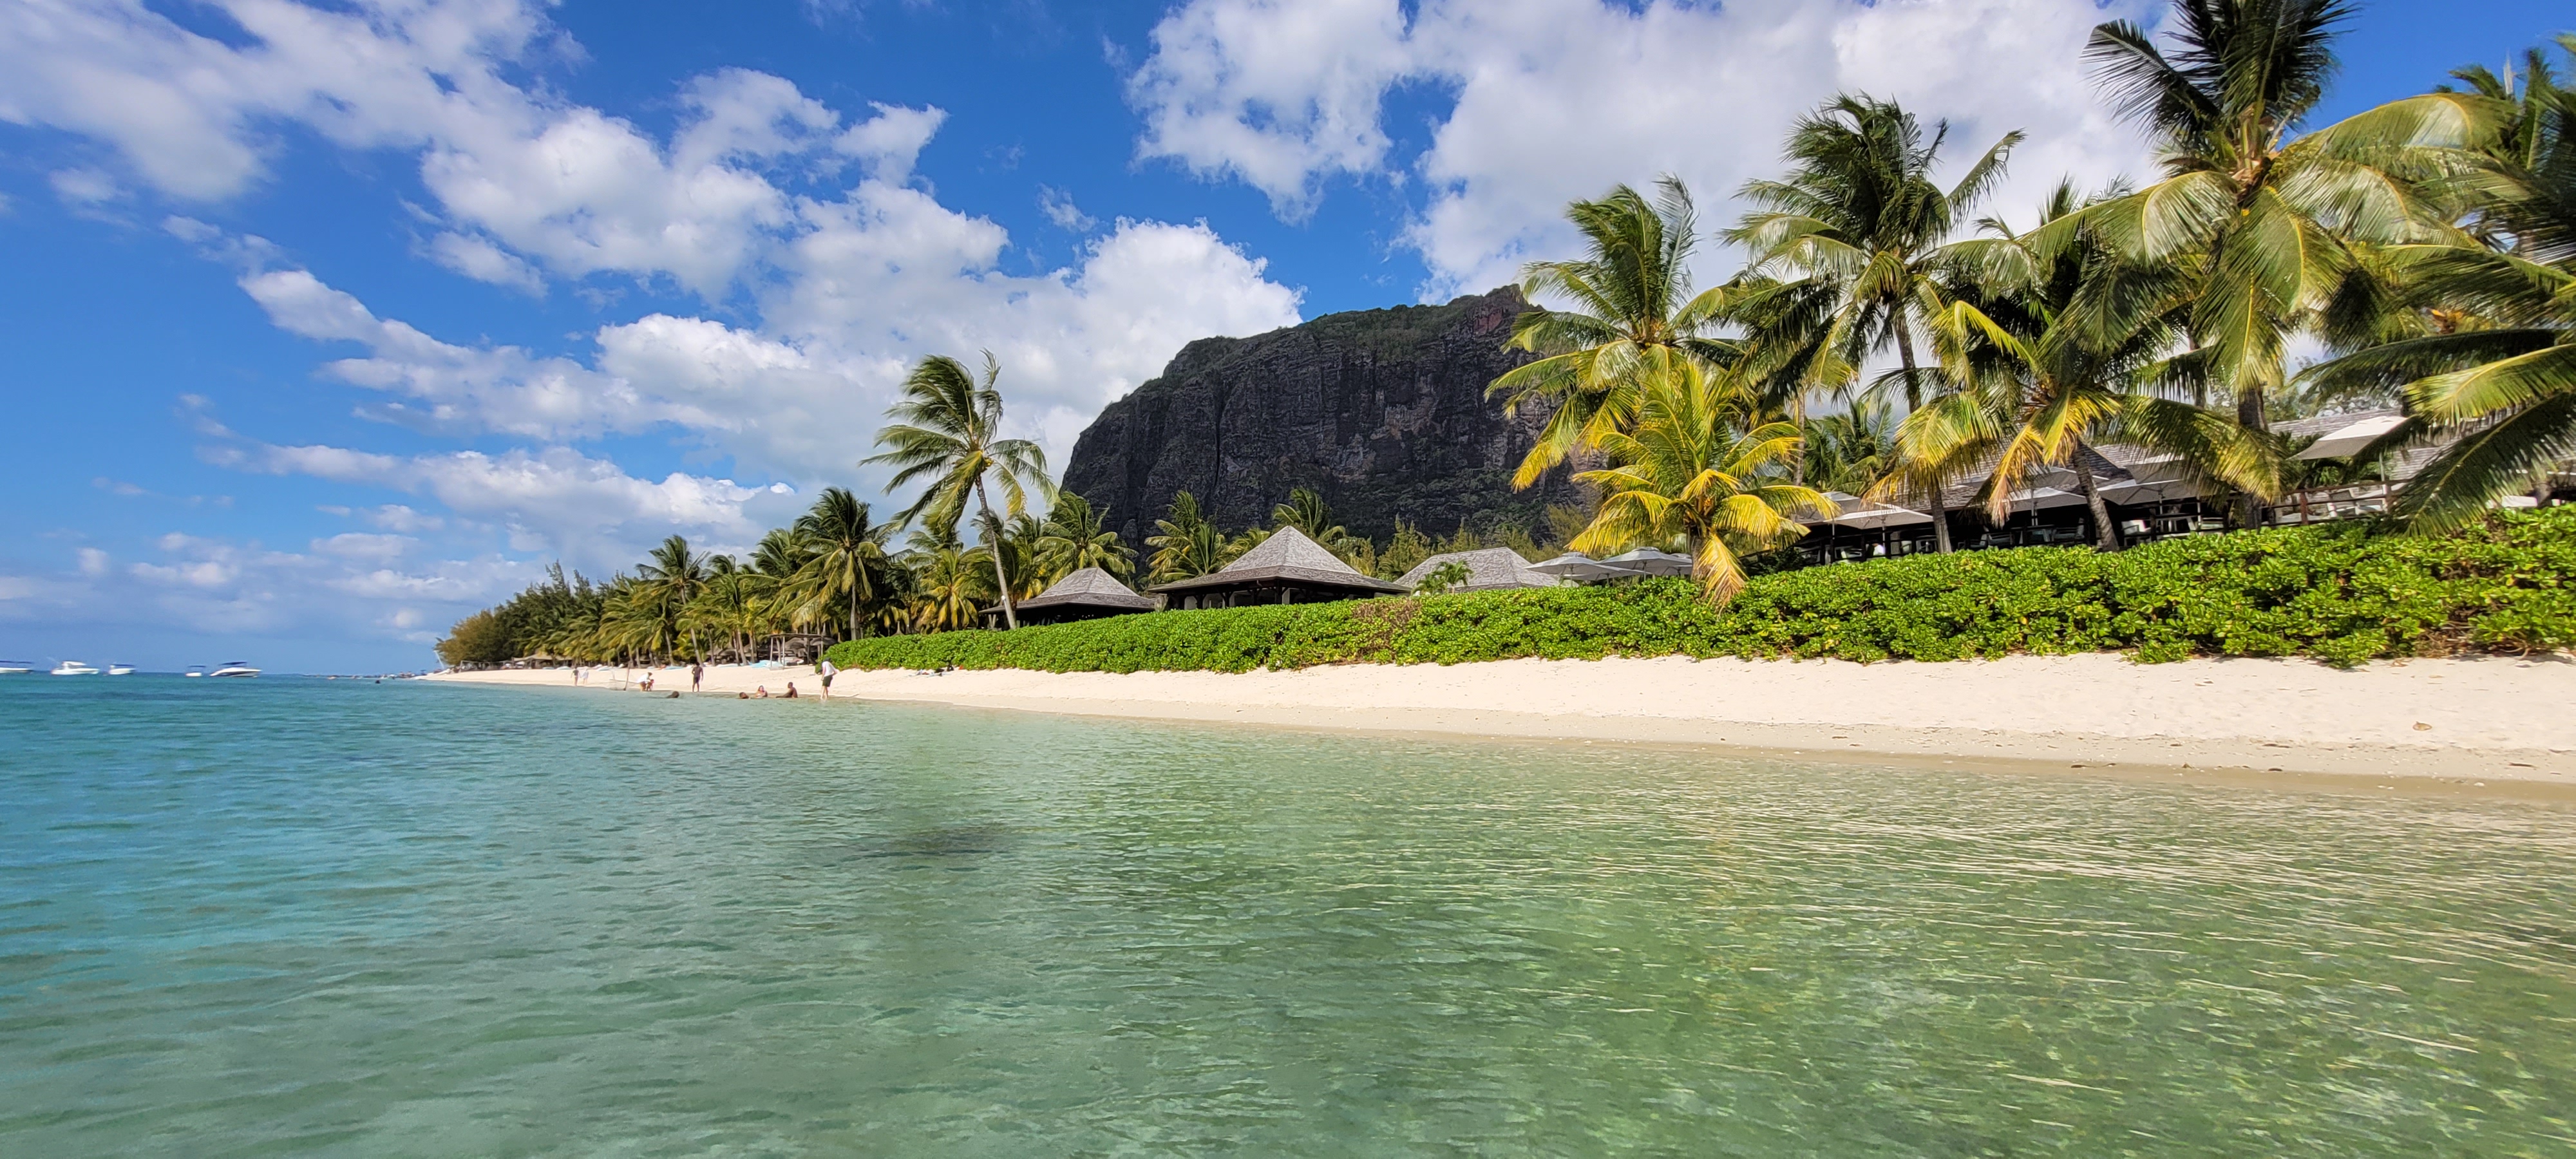 The most beautiful beaches of Mauritius